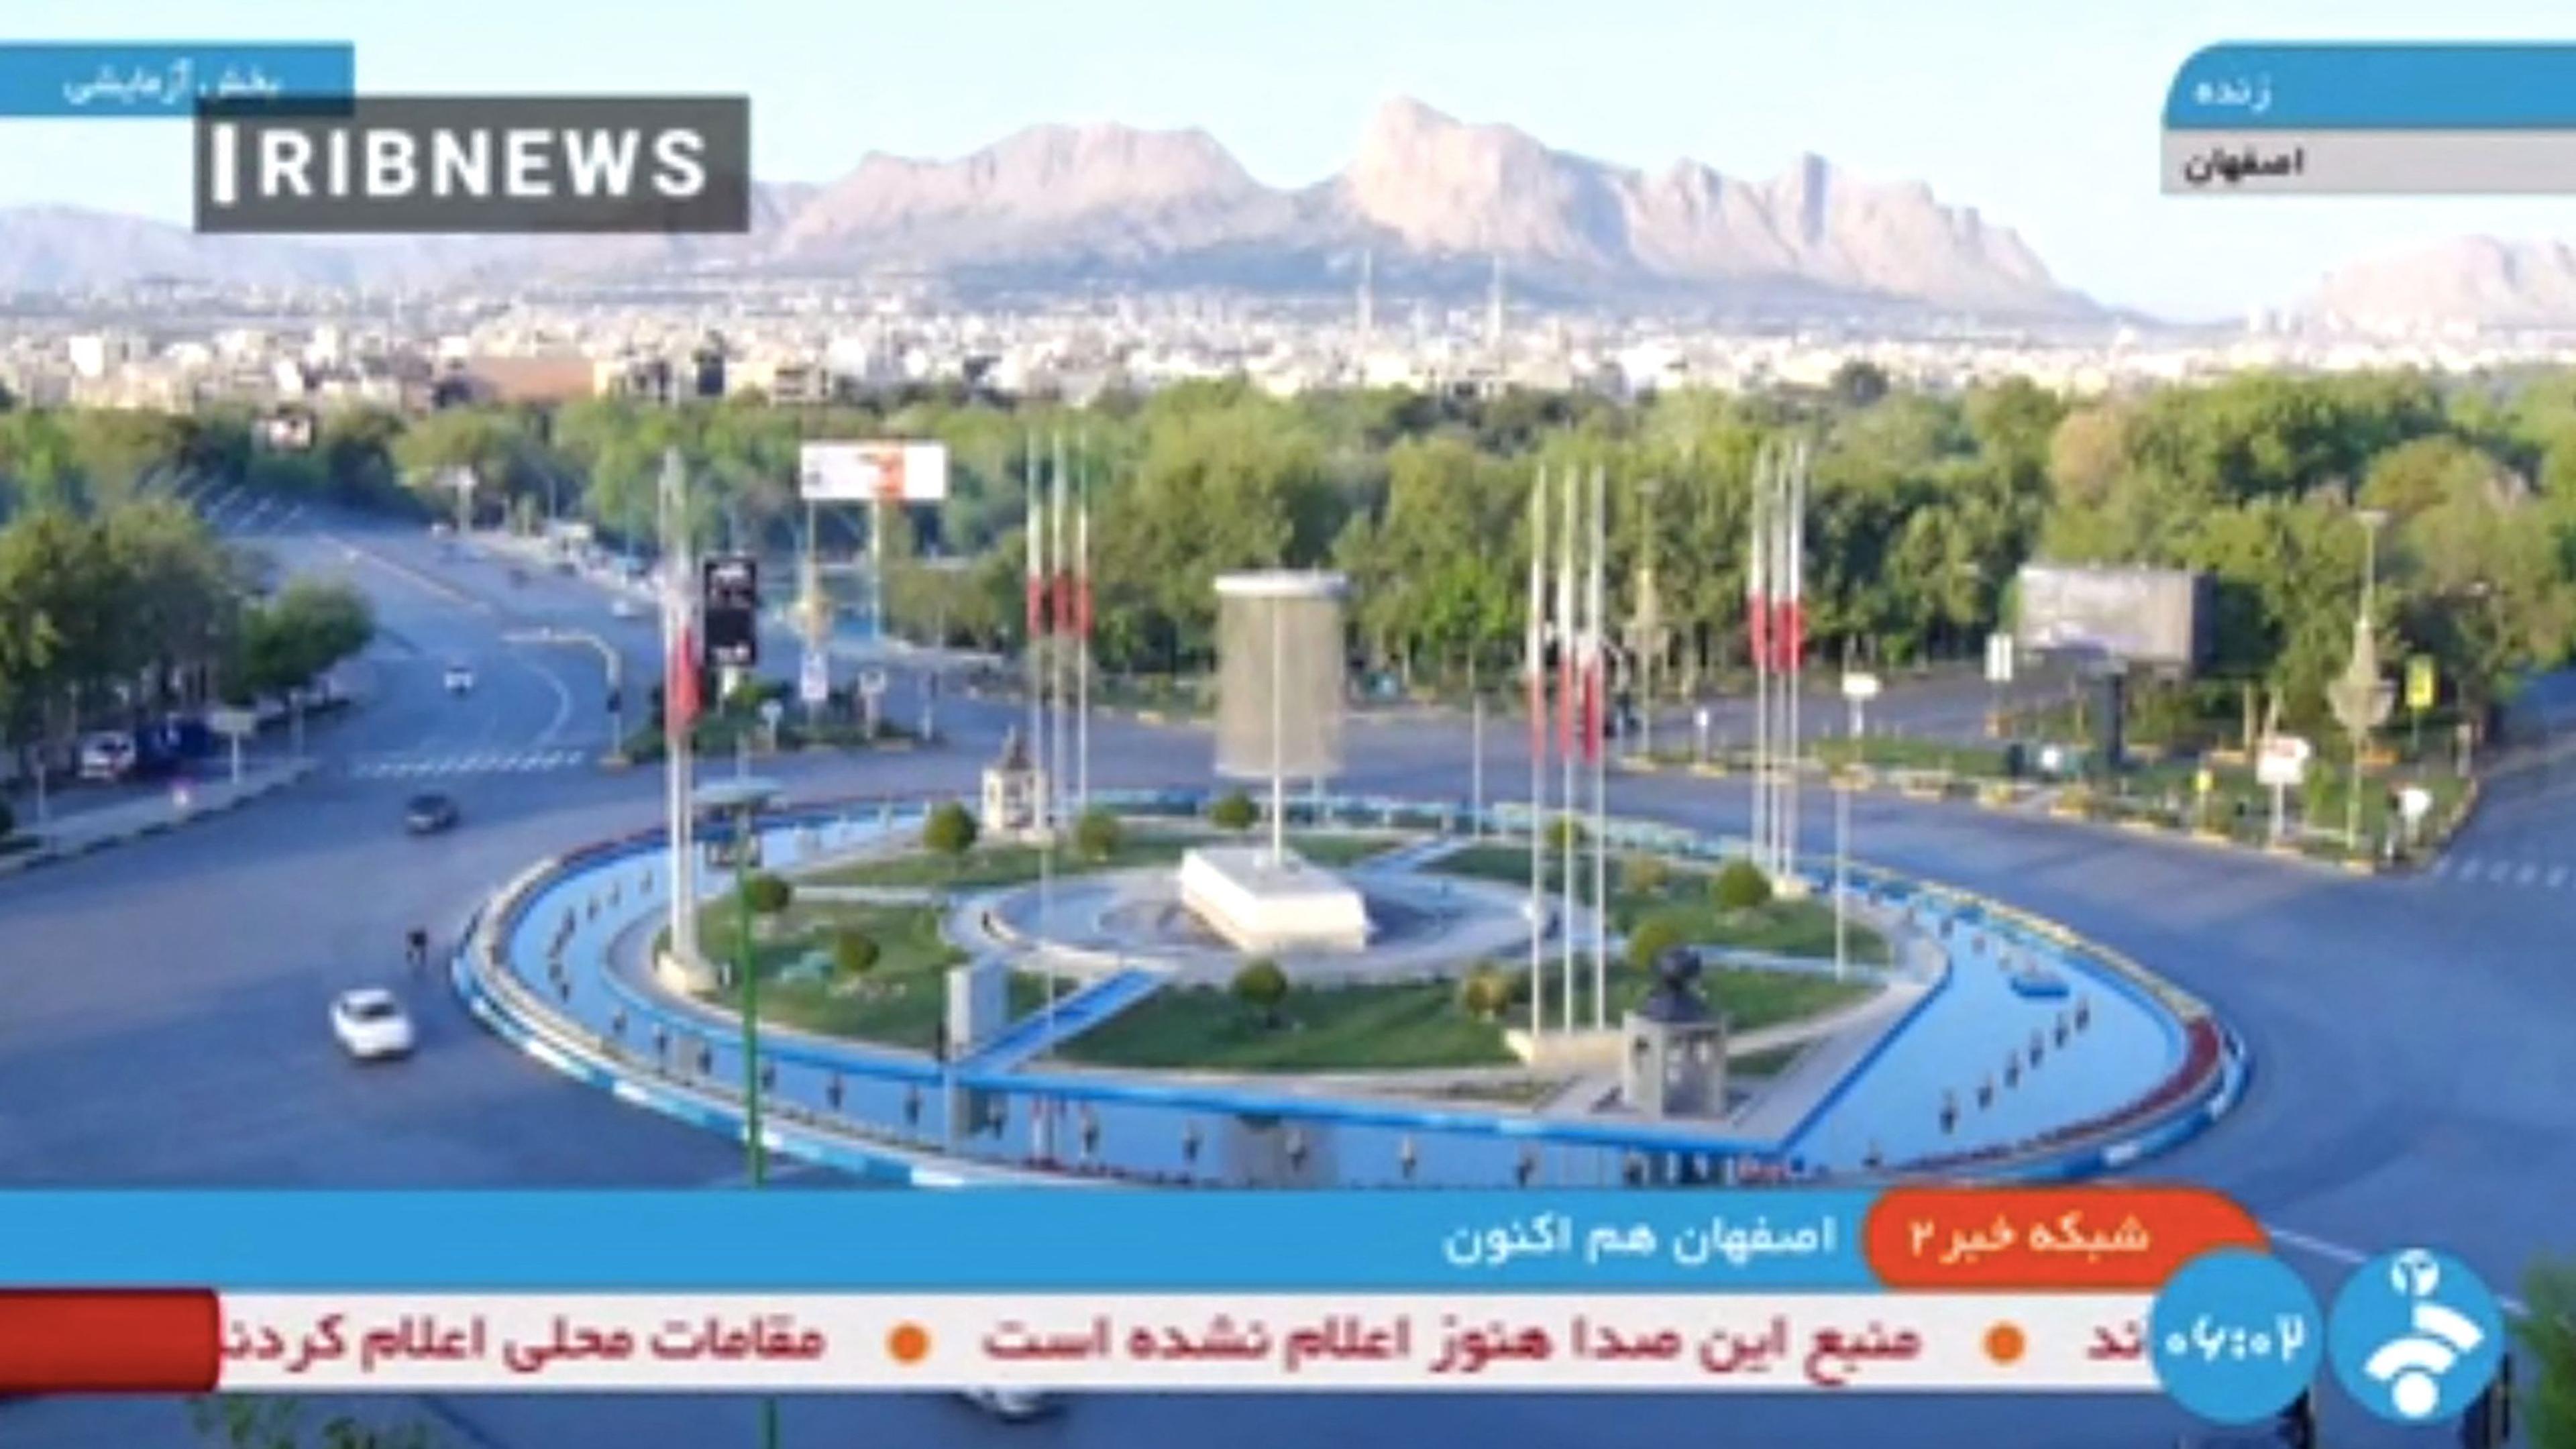 A handout image grab made available by the Iranian state TV, the Islamic Republic of Iran Broadcasting (IRIB), shows what the TV said was a live picture of the city of Isfahan early on April 19, 2024, following reports of explosions heard in the province in central Iran. Iran's state media reported explosions in the northwest of the central province of Isfahan on April 19, as US media quoted officials saying Israel had carried out retaliatory strikes on its arch-rival. Nuclear facilities in Isfahan were reported to be "completely secure", Iran's Tasnim news agency reported, citing "reliable sources". (Photo by IRANIAN STATE TV (IRIB) / AFP) / RESTRICTED TO EDITORIAL USE - MANDATORY CREDIT "AFP PHOTO / HO / IRIB" - NO MARKETING NO ADVERTISING CAMPAIGNS - DISTRIBUTED AS A SERVICE TO CLIENTS /NO RESALE/ NO ACCESS ISRAEL MEDIA/PERSIAN LANGUAGE TV STATIONS/ OUTSIDE IRAN/ STRICTLY NO ACCESS BBC PERSIAN/ VOA PERSIAN/ MANOTO-1 TV/ IRAN INTERNATIONAL/RADIO FARDA
BEST QUALITY AVAILABLE / 